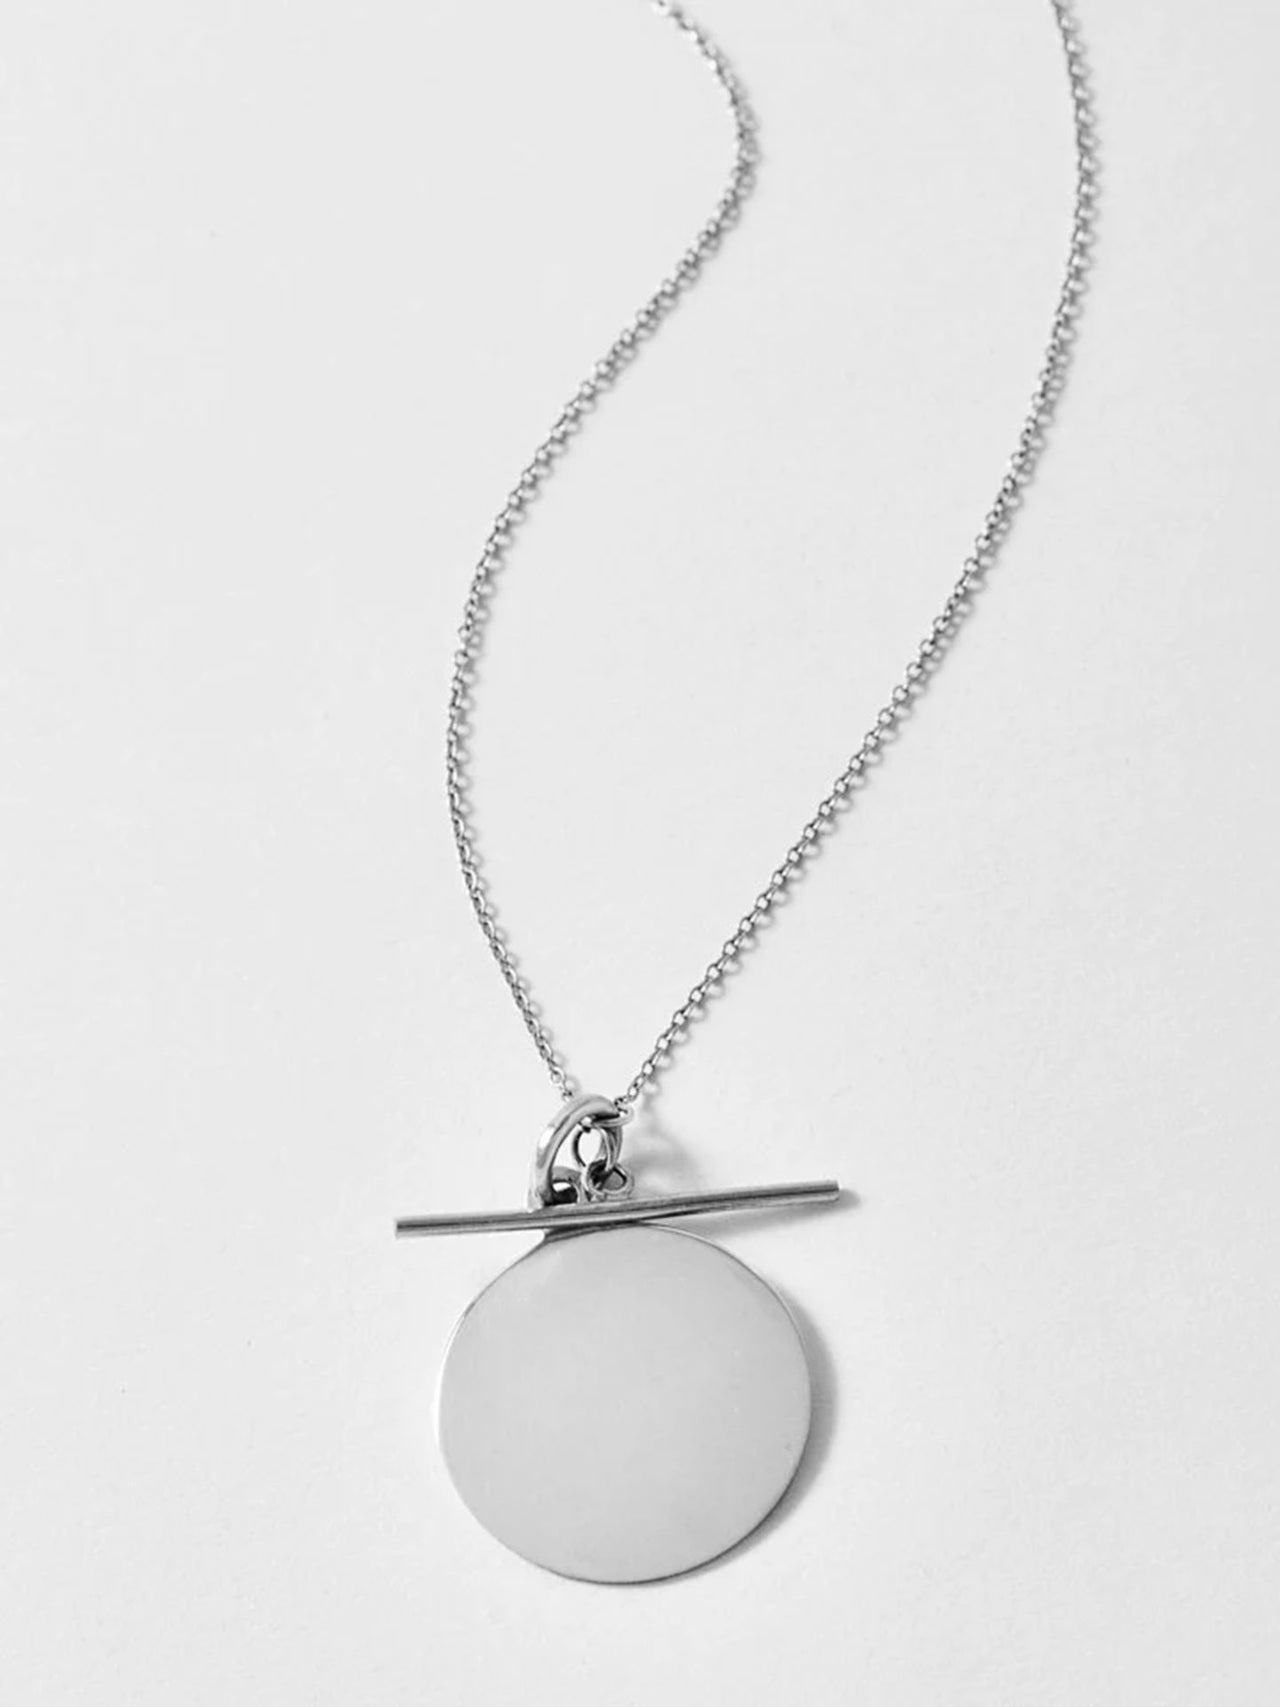 Sterling Silver Disk and Toggle pictured on light grey background.